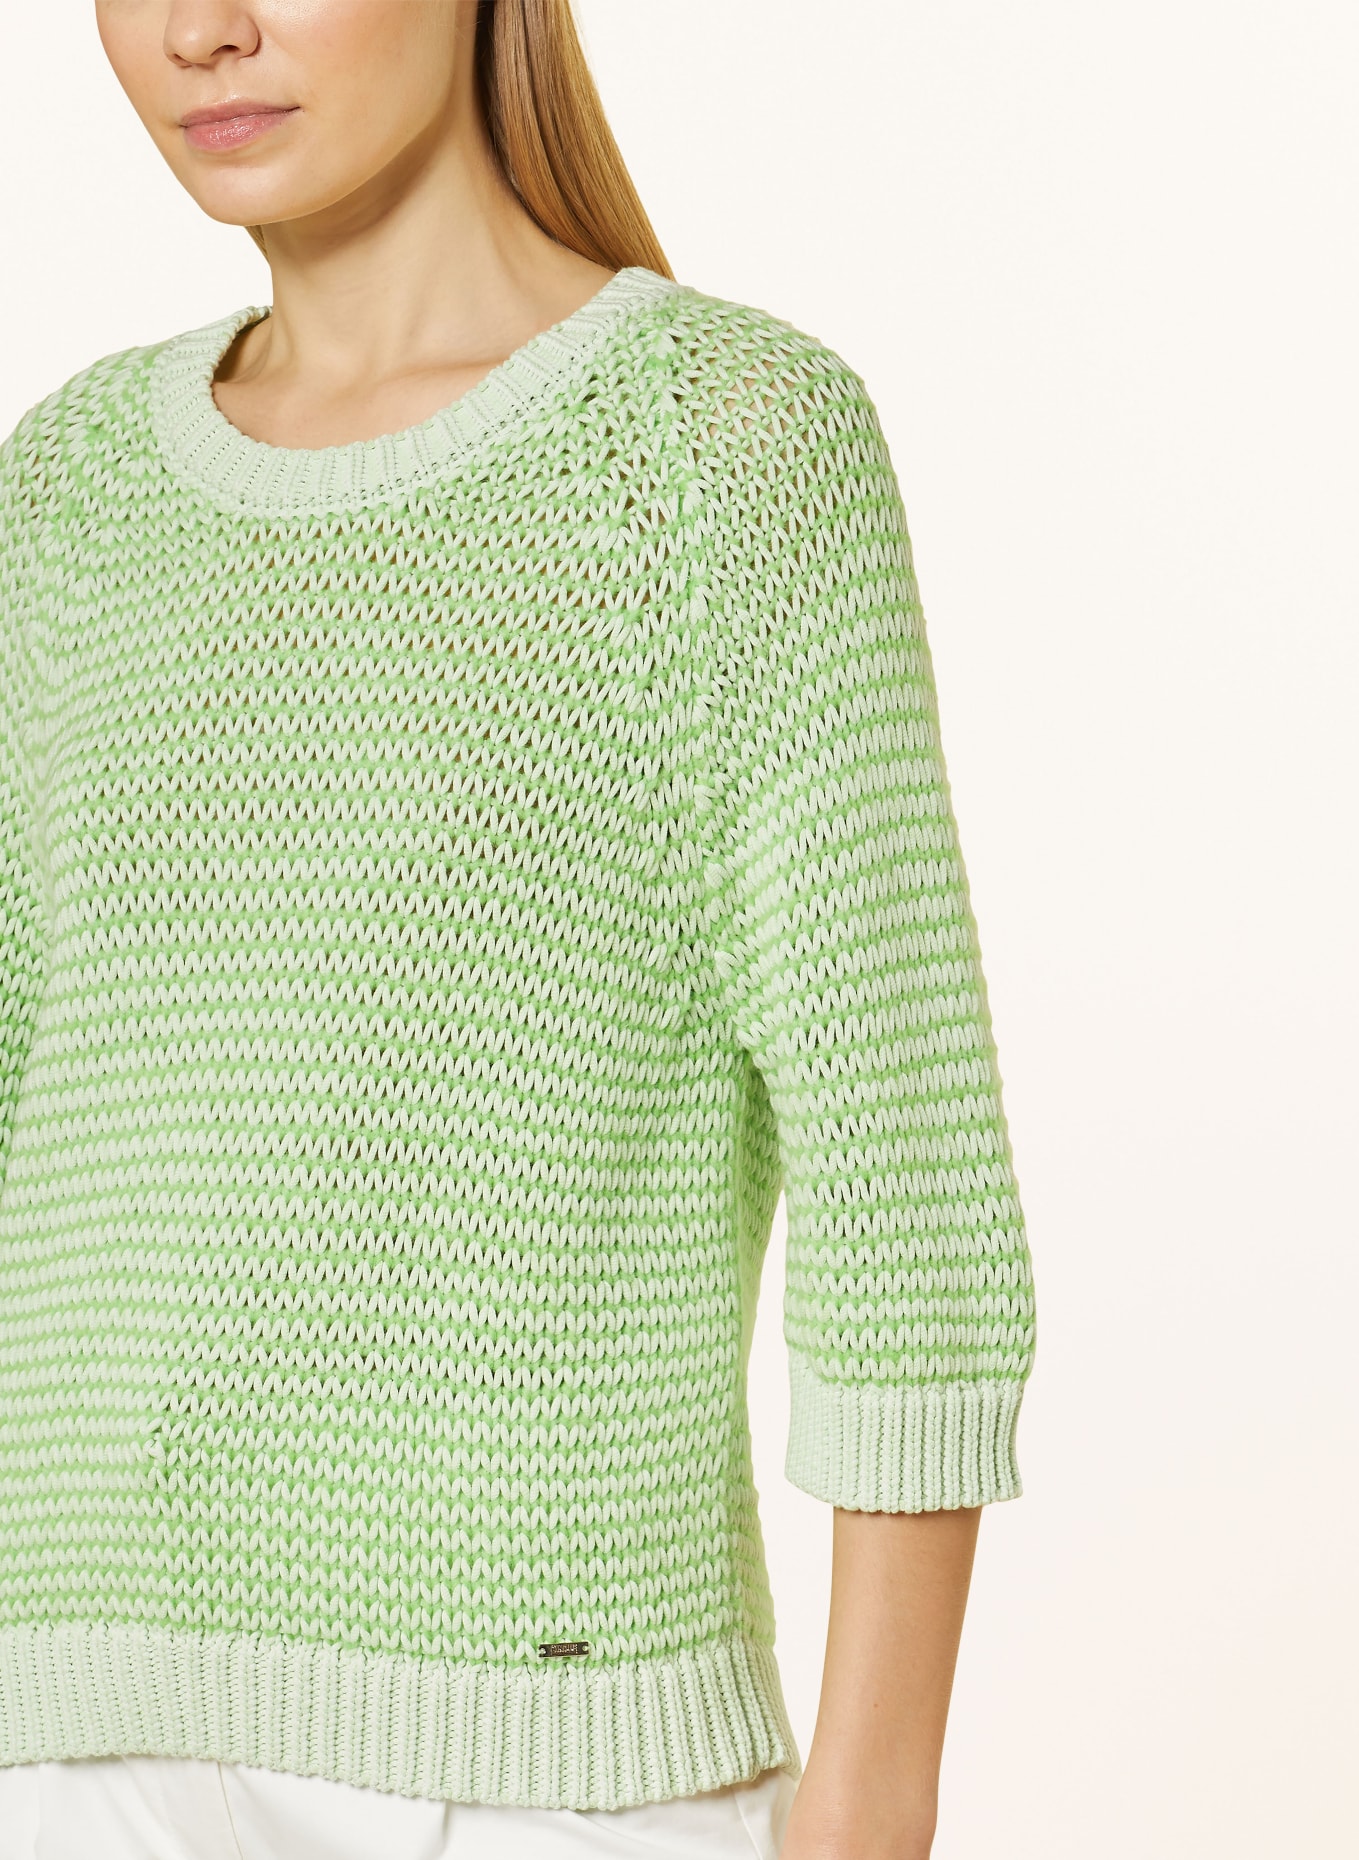 CINQUE Sweater CIANJE with 3/4 sleeves, Color: LIGHT GREEN (Image 4)